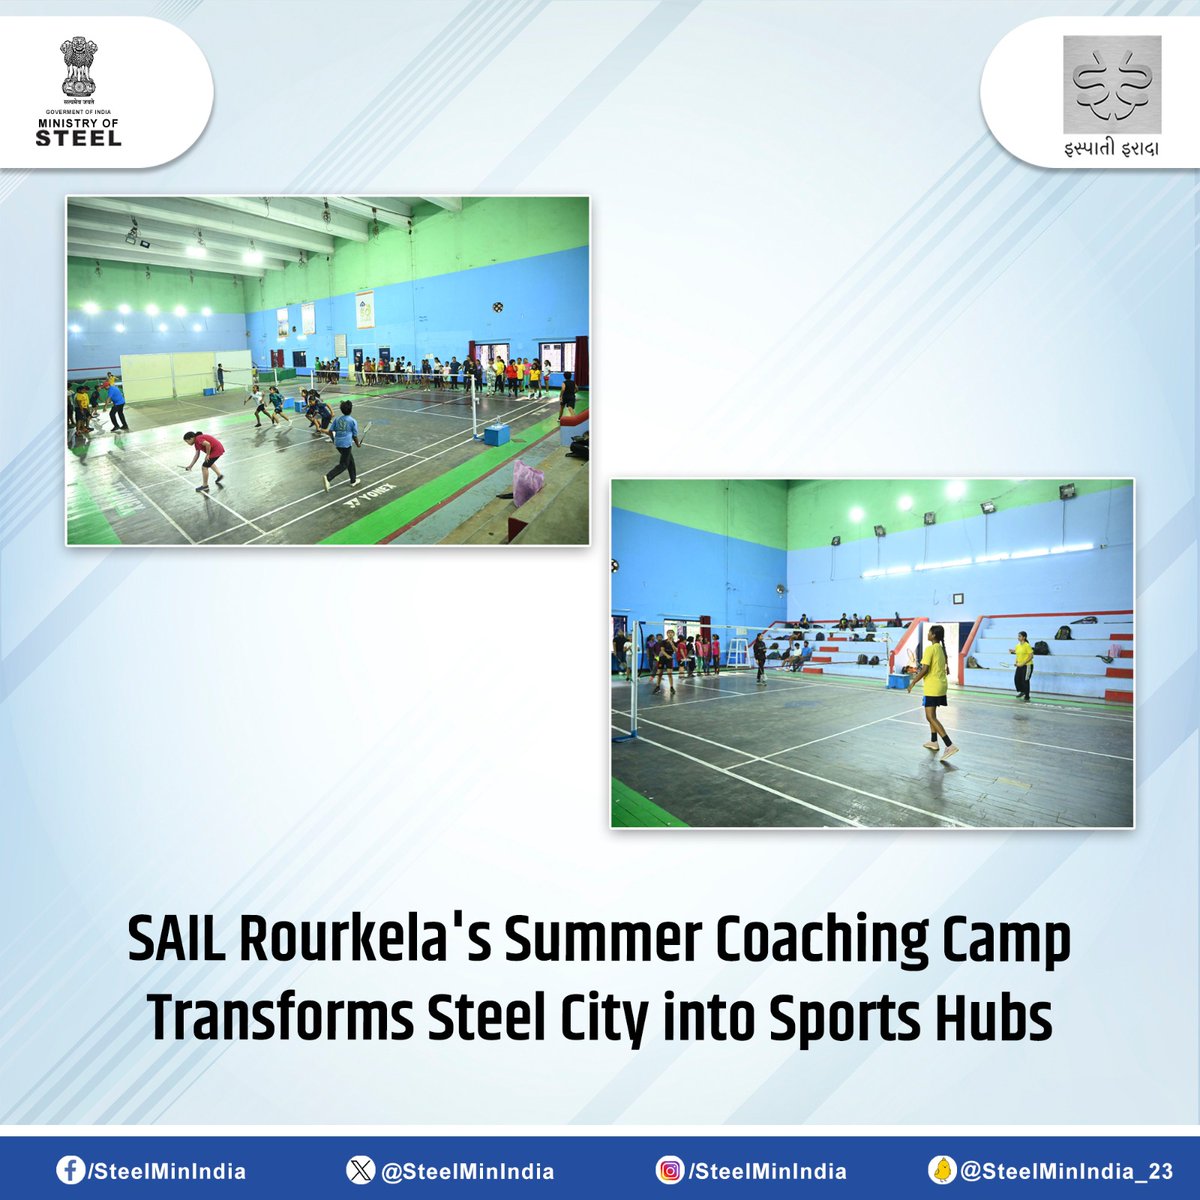 Excitement abounds as #SAIL #Rourkela's Summer Coaching Camp transforms Rourkela's sporting grounds into a vibrant center of youth activity. #SummerCoachingCamp #SportsCamp